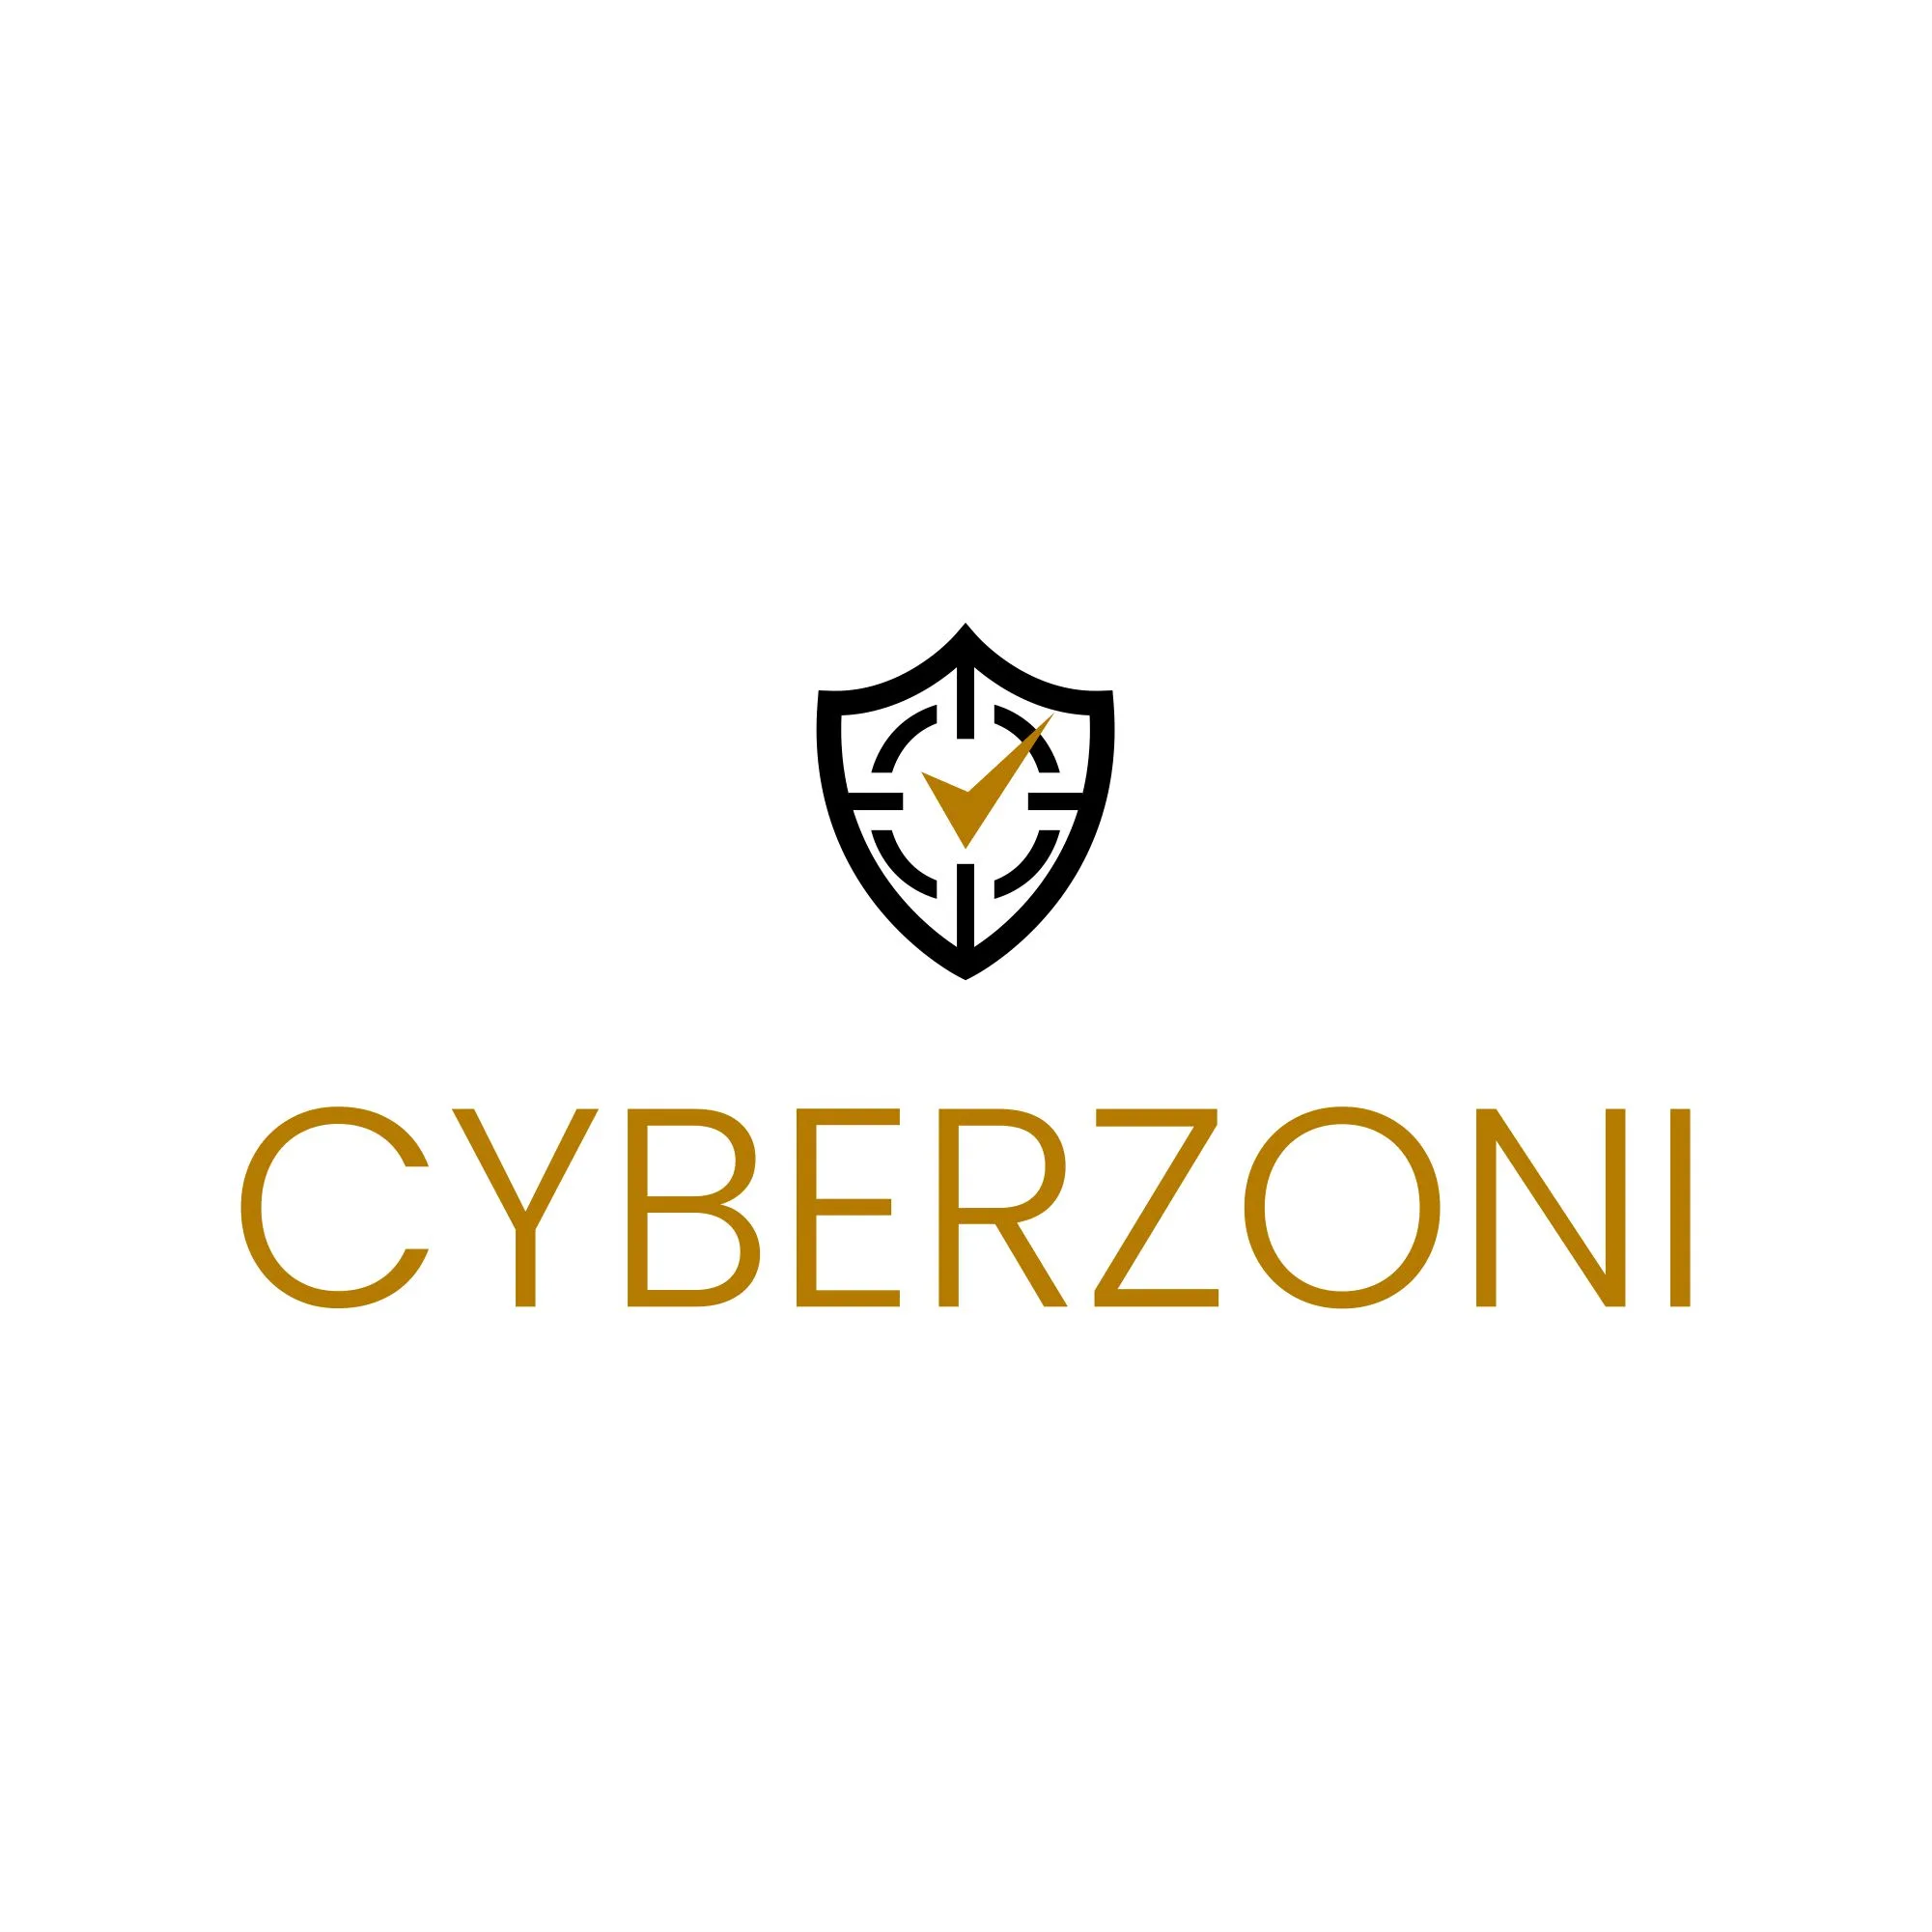 Cyberzoni Products